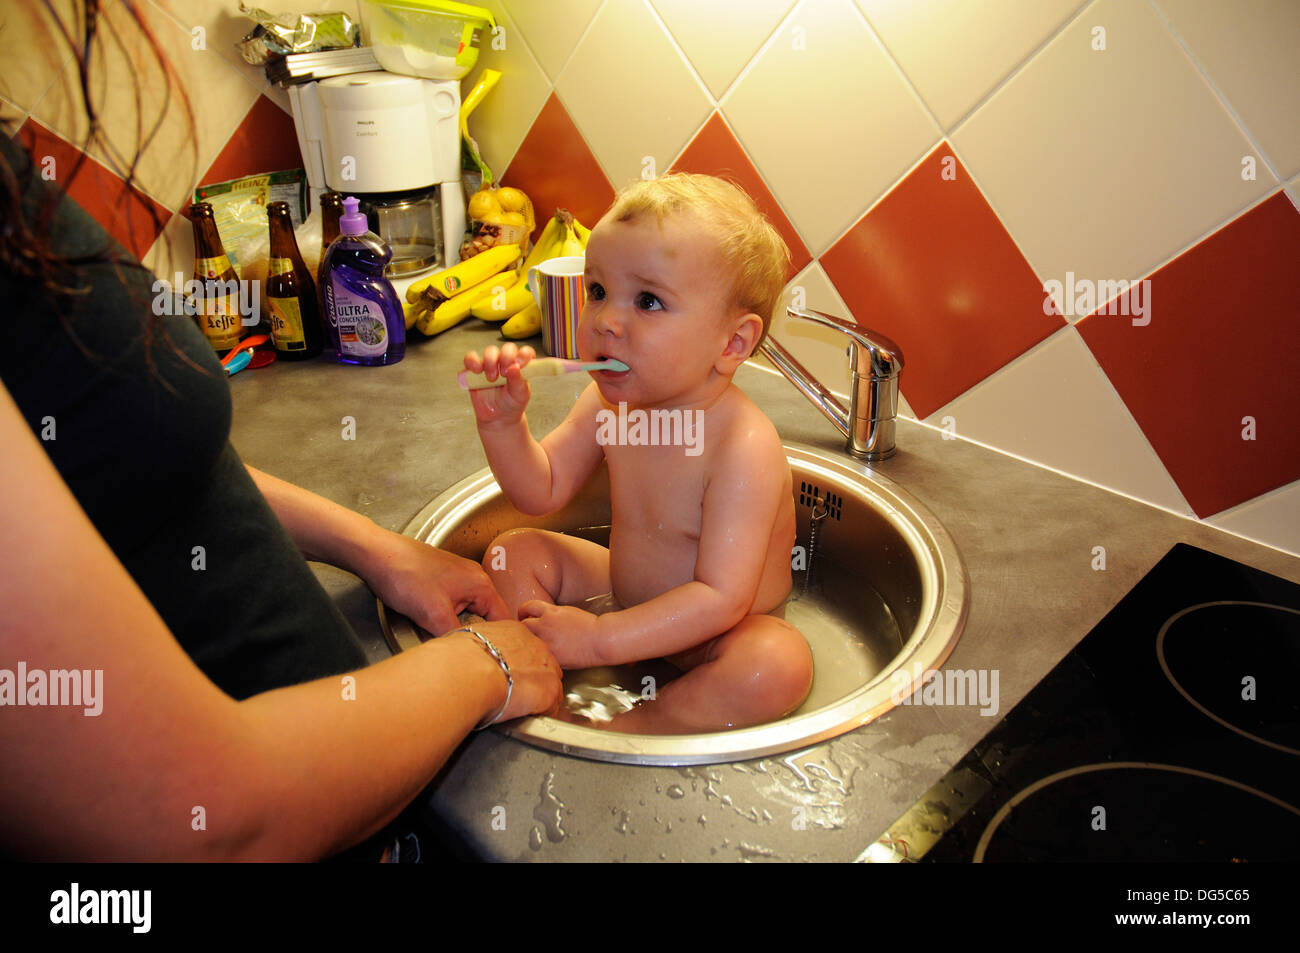 A baby having his bath and scrubbing his teeth in the kitchen sink Stock Photo